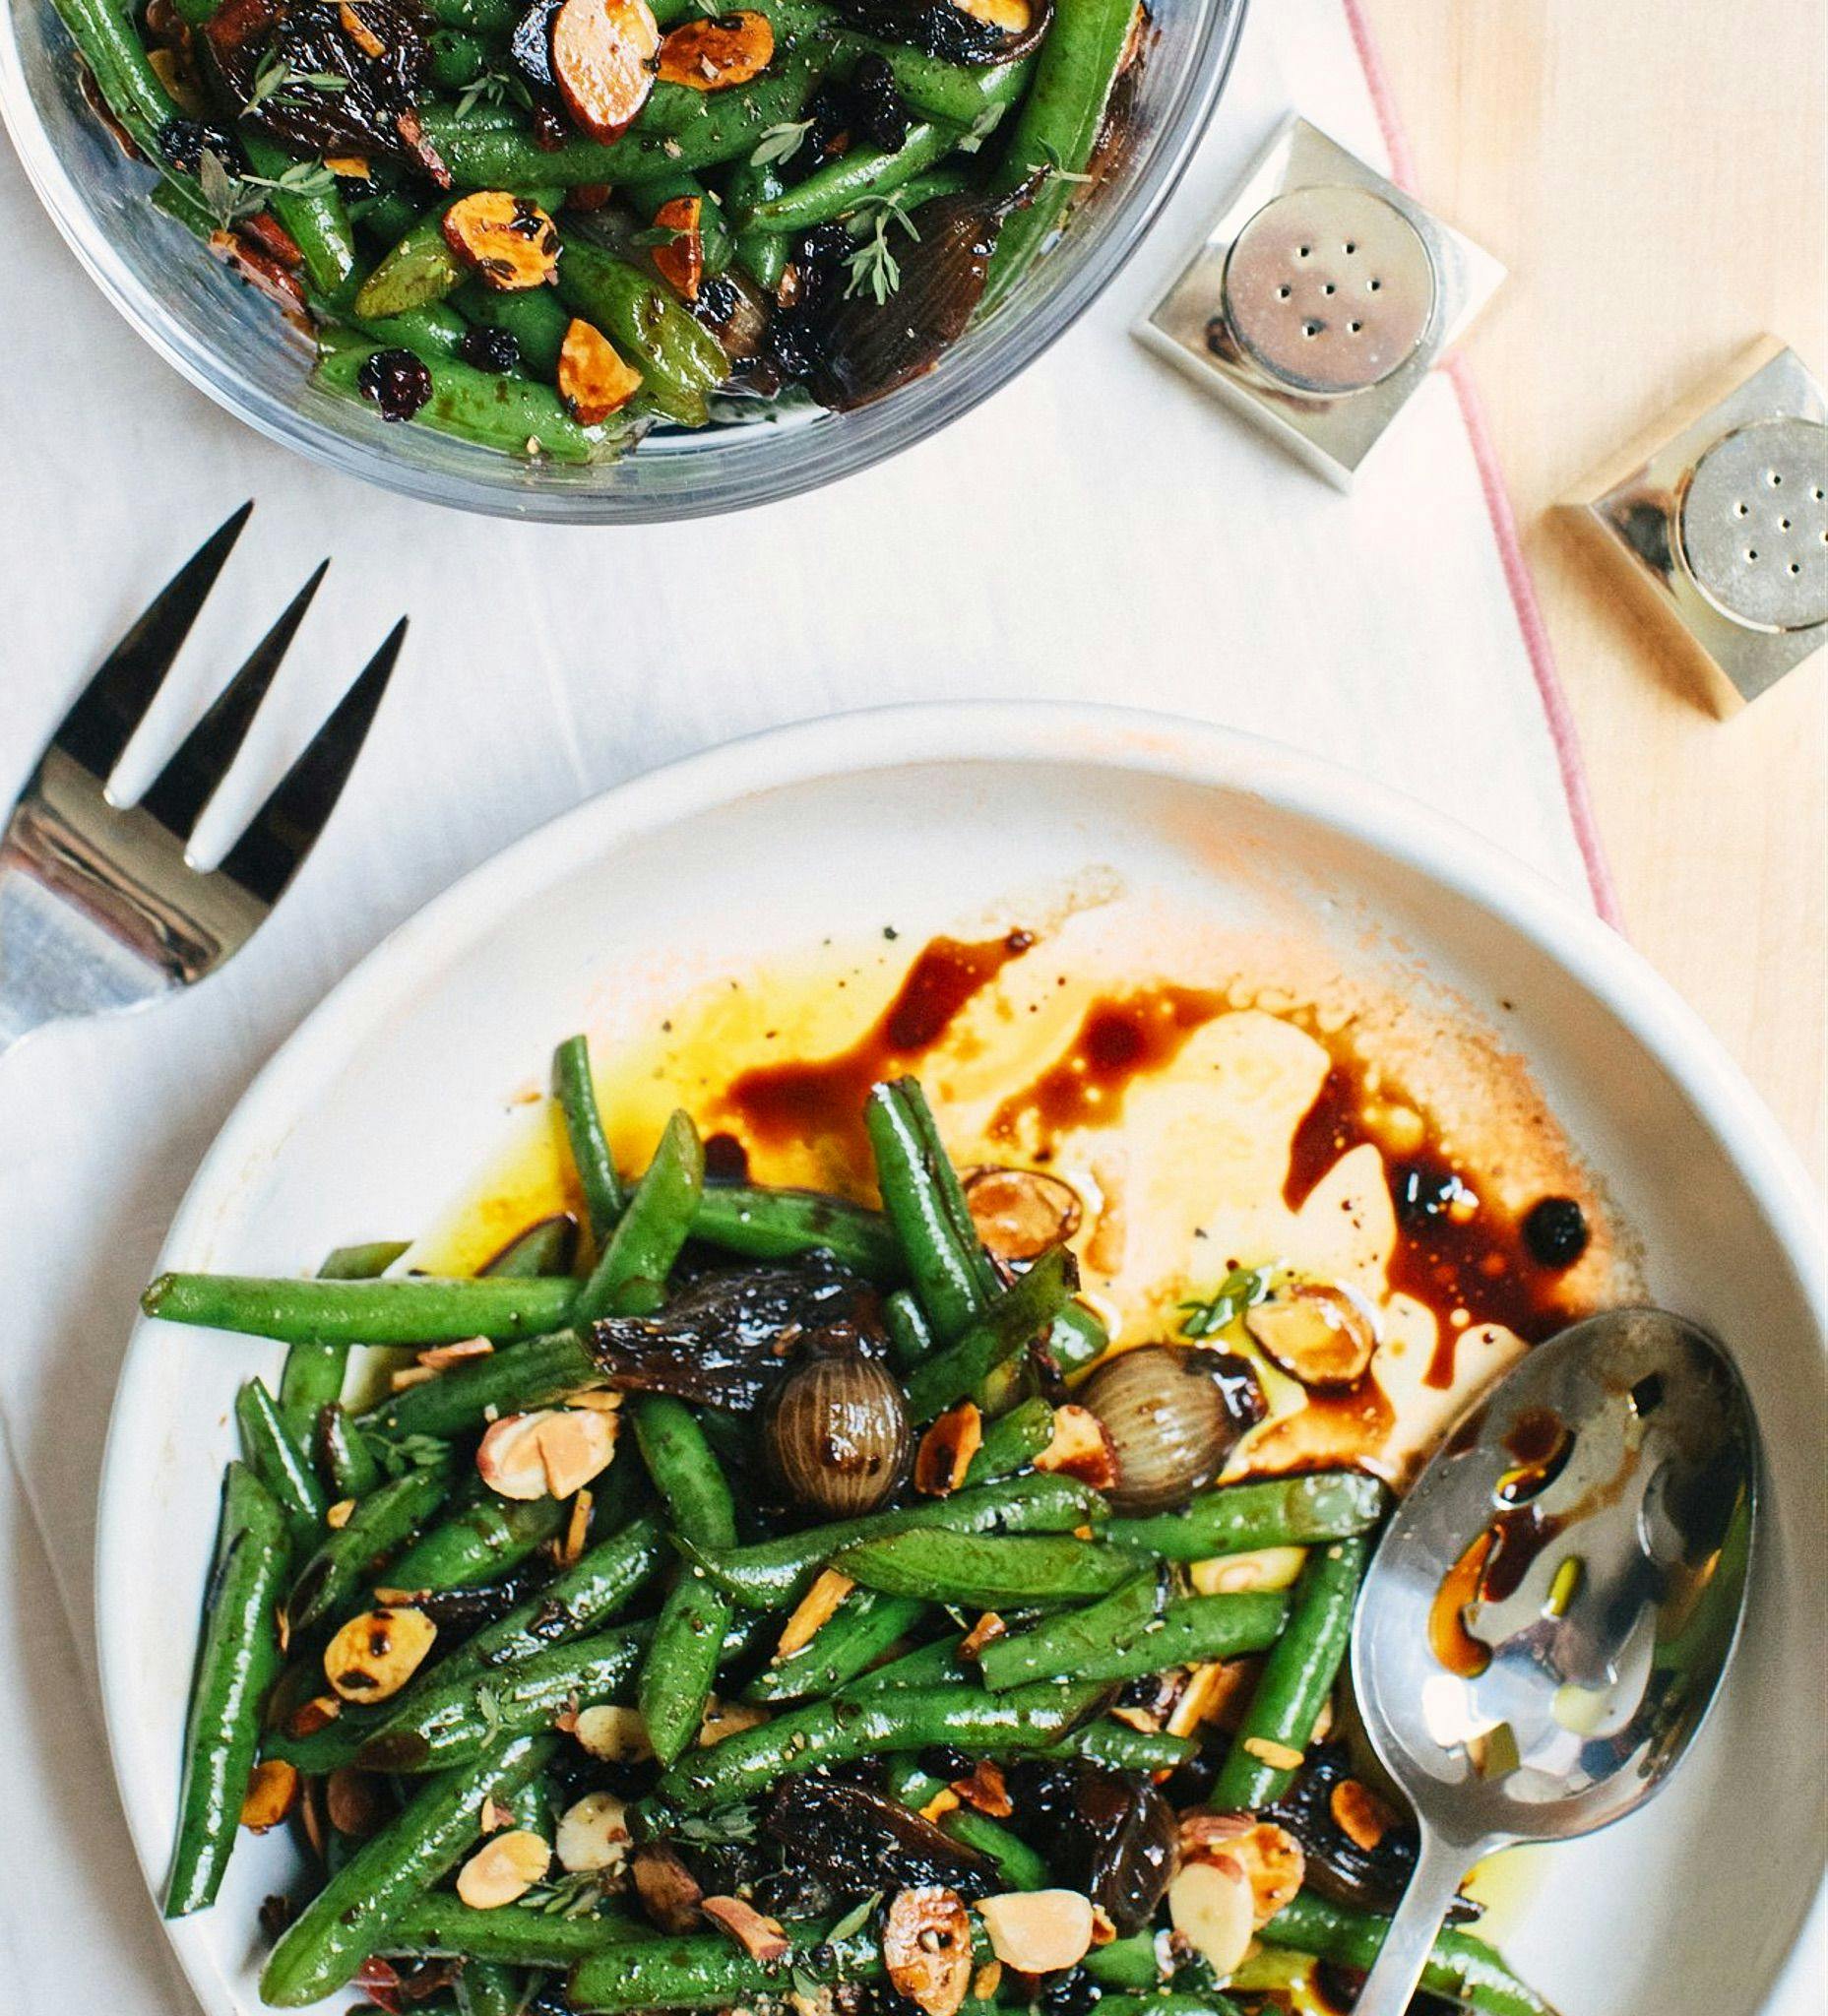 Balsamic saucy green beans with pearl onions and sliced almonds